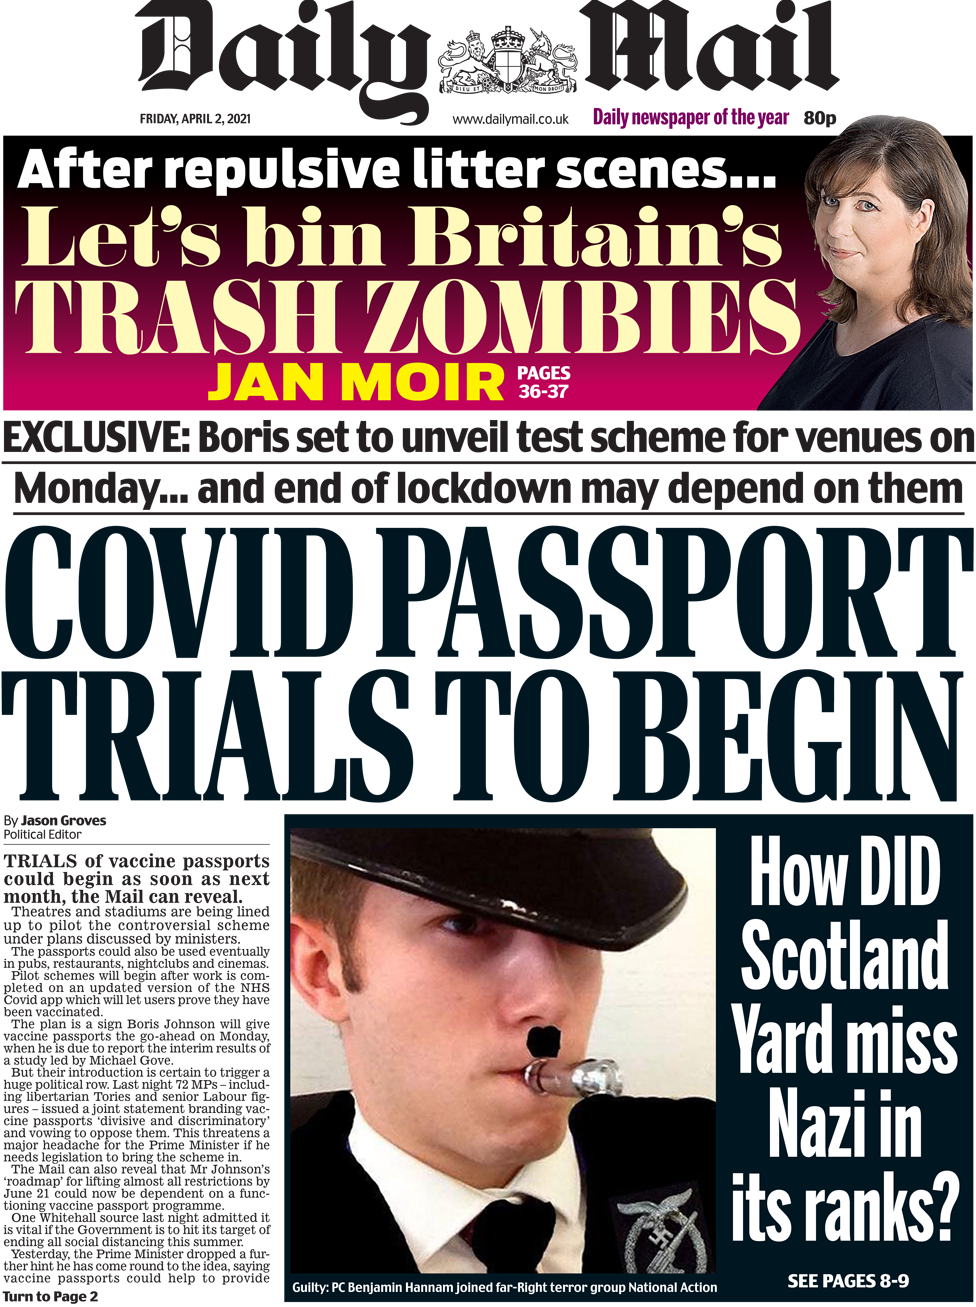 The Daily Mail front page 2 April 2021